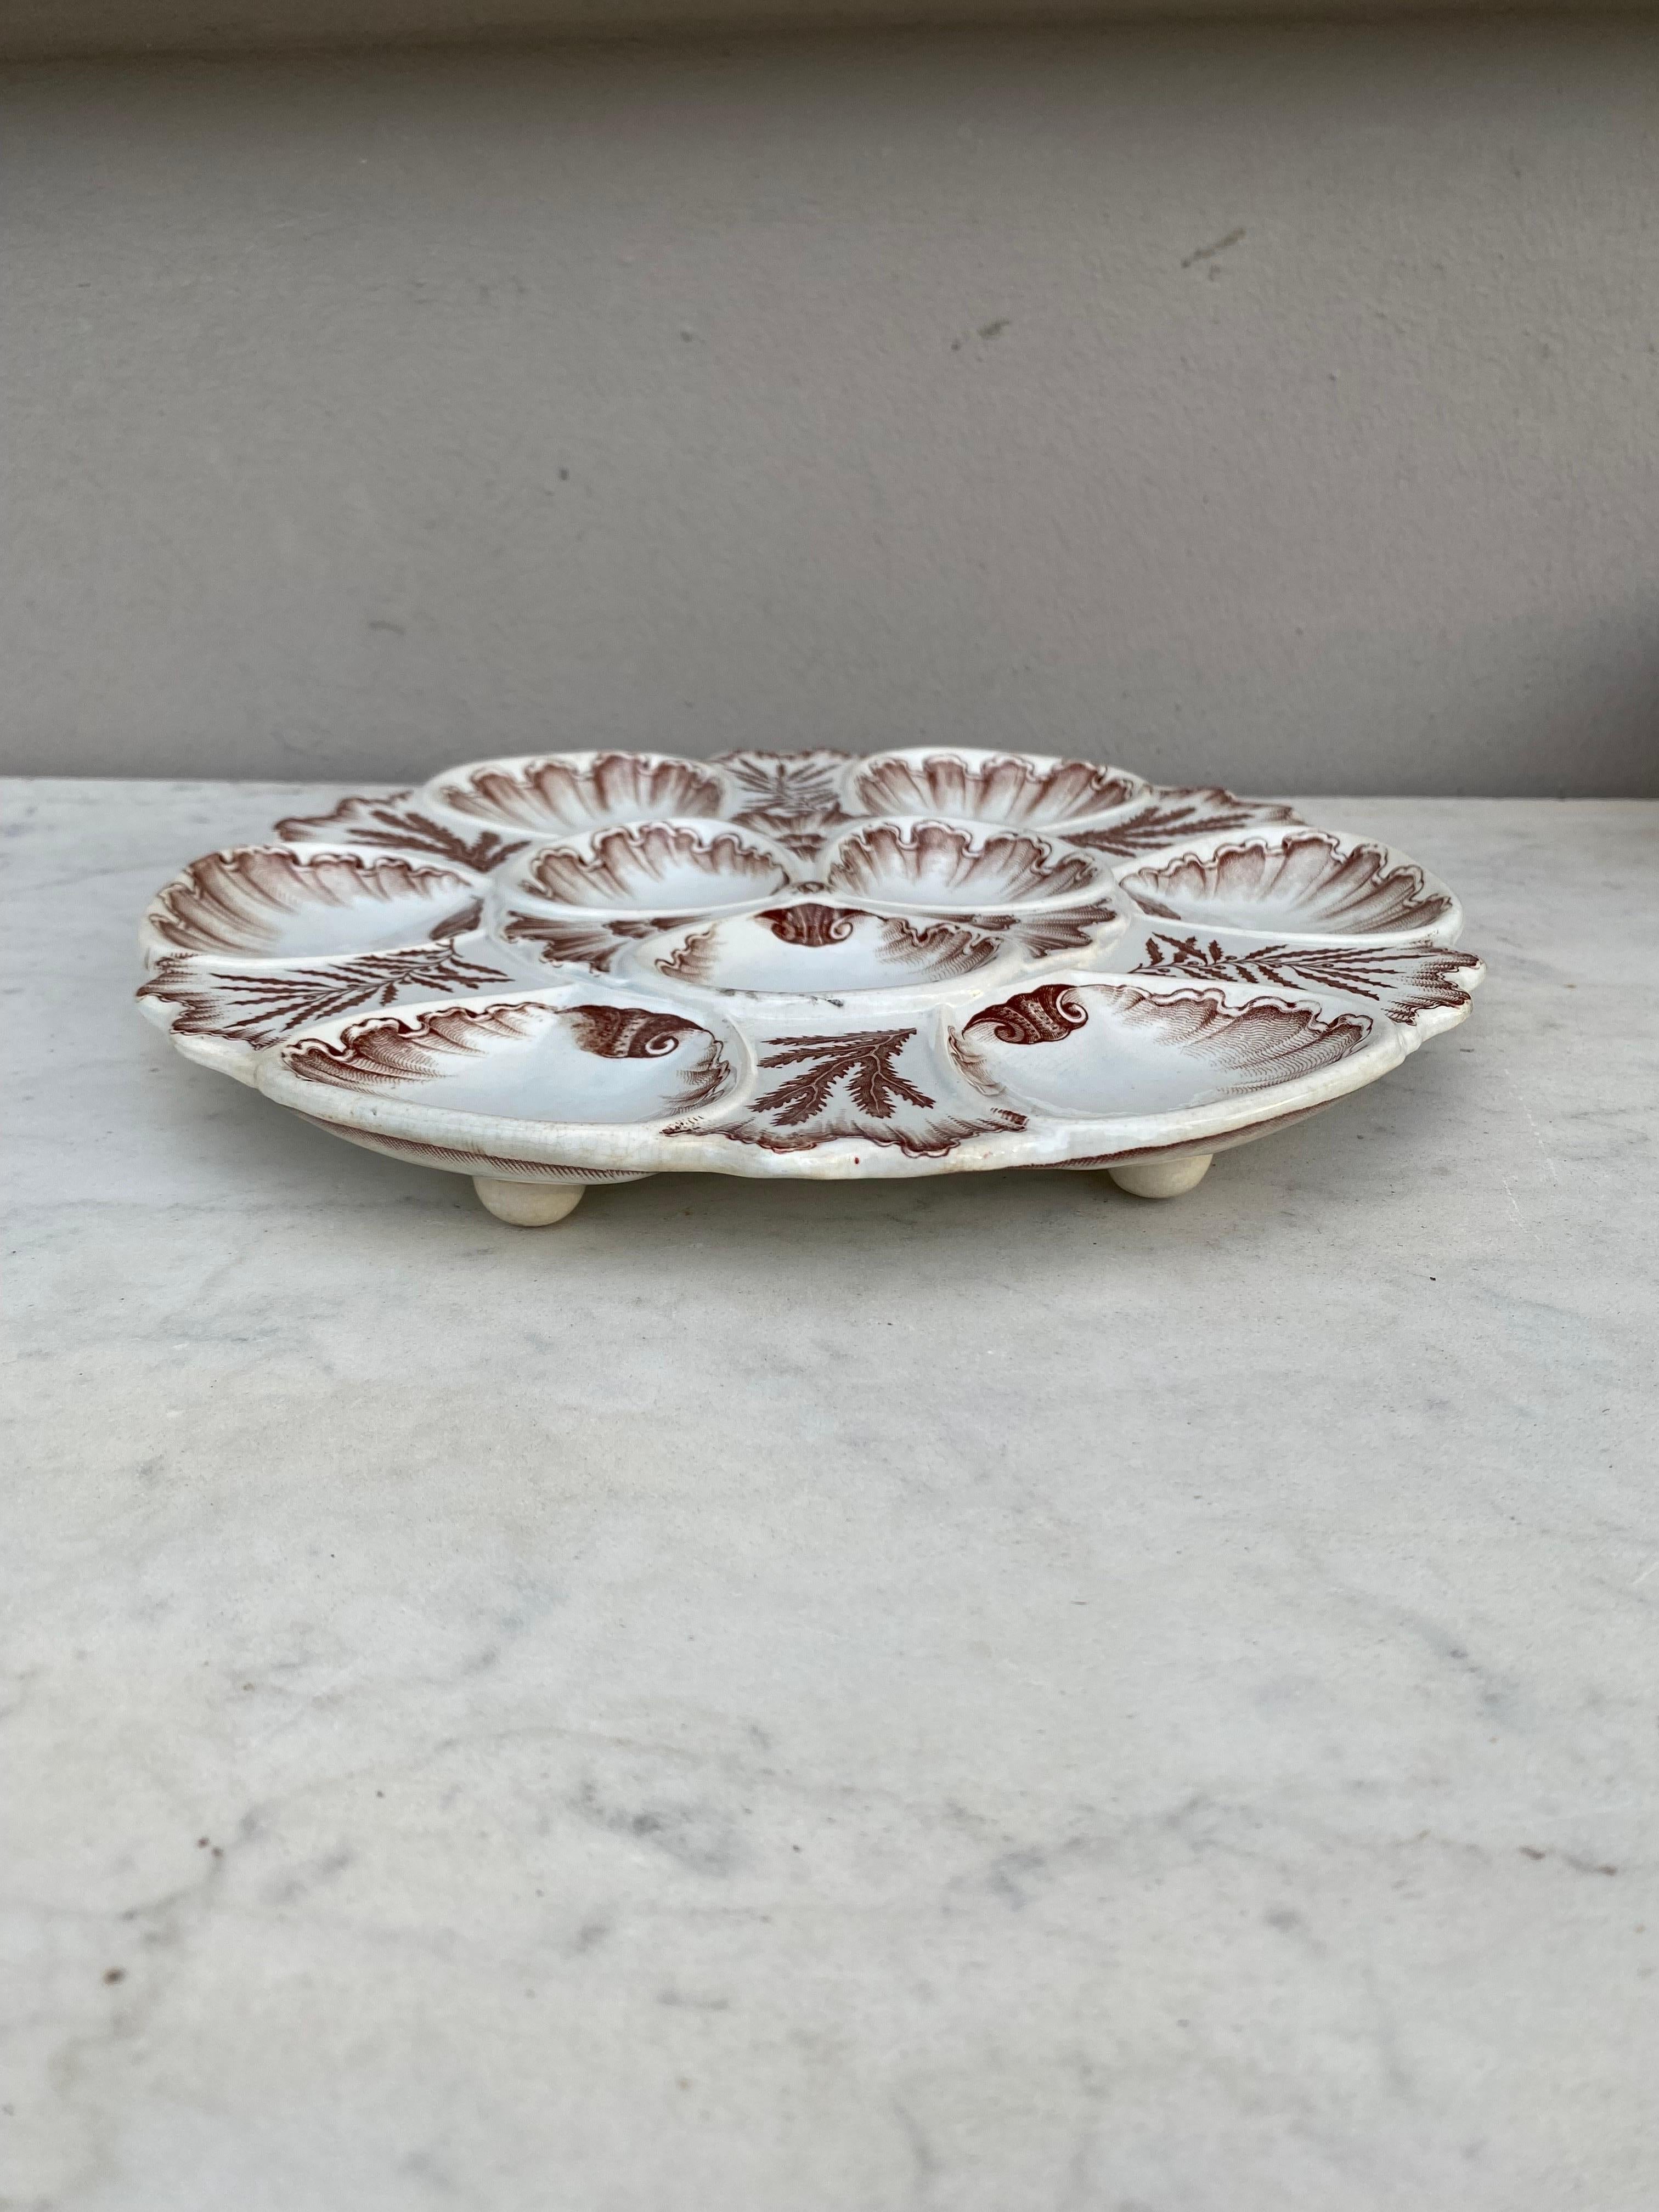 Rare brown 19th faience oyster plate signed Vieillard Bordeaux usually found in blue in white.